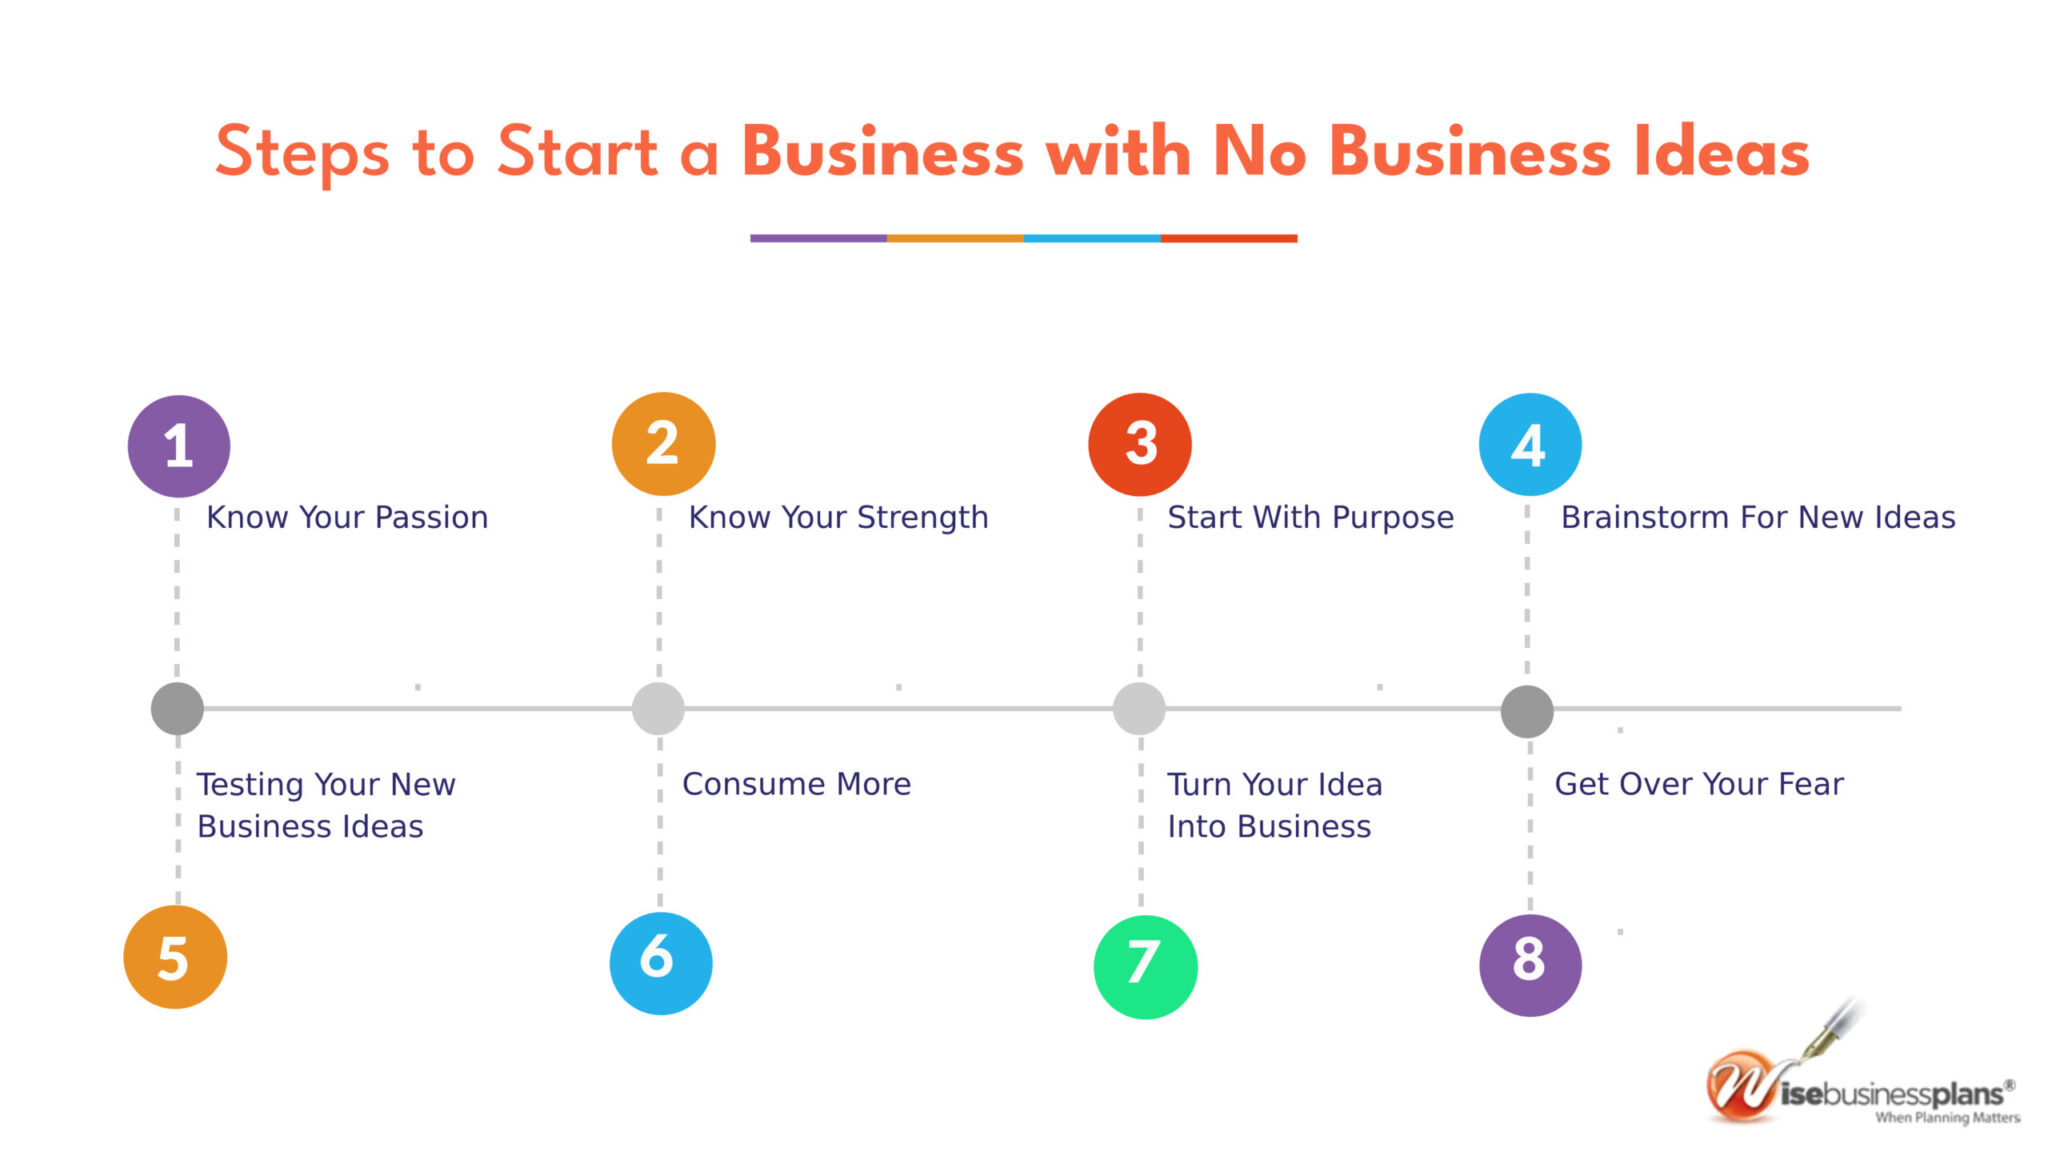 Tips when to want to start a business but have no ideas